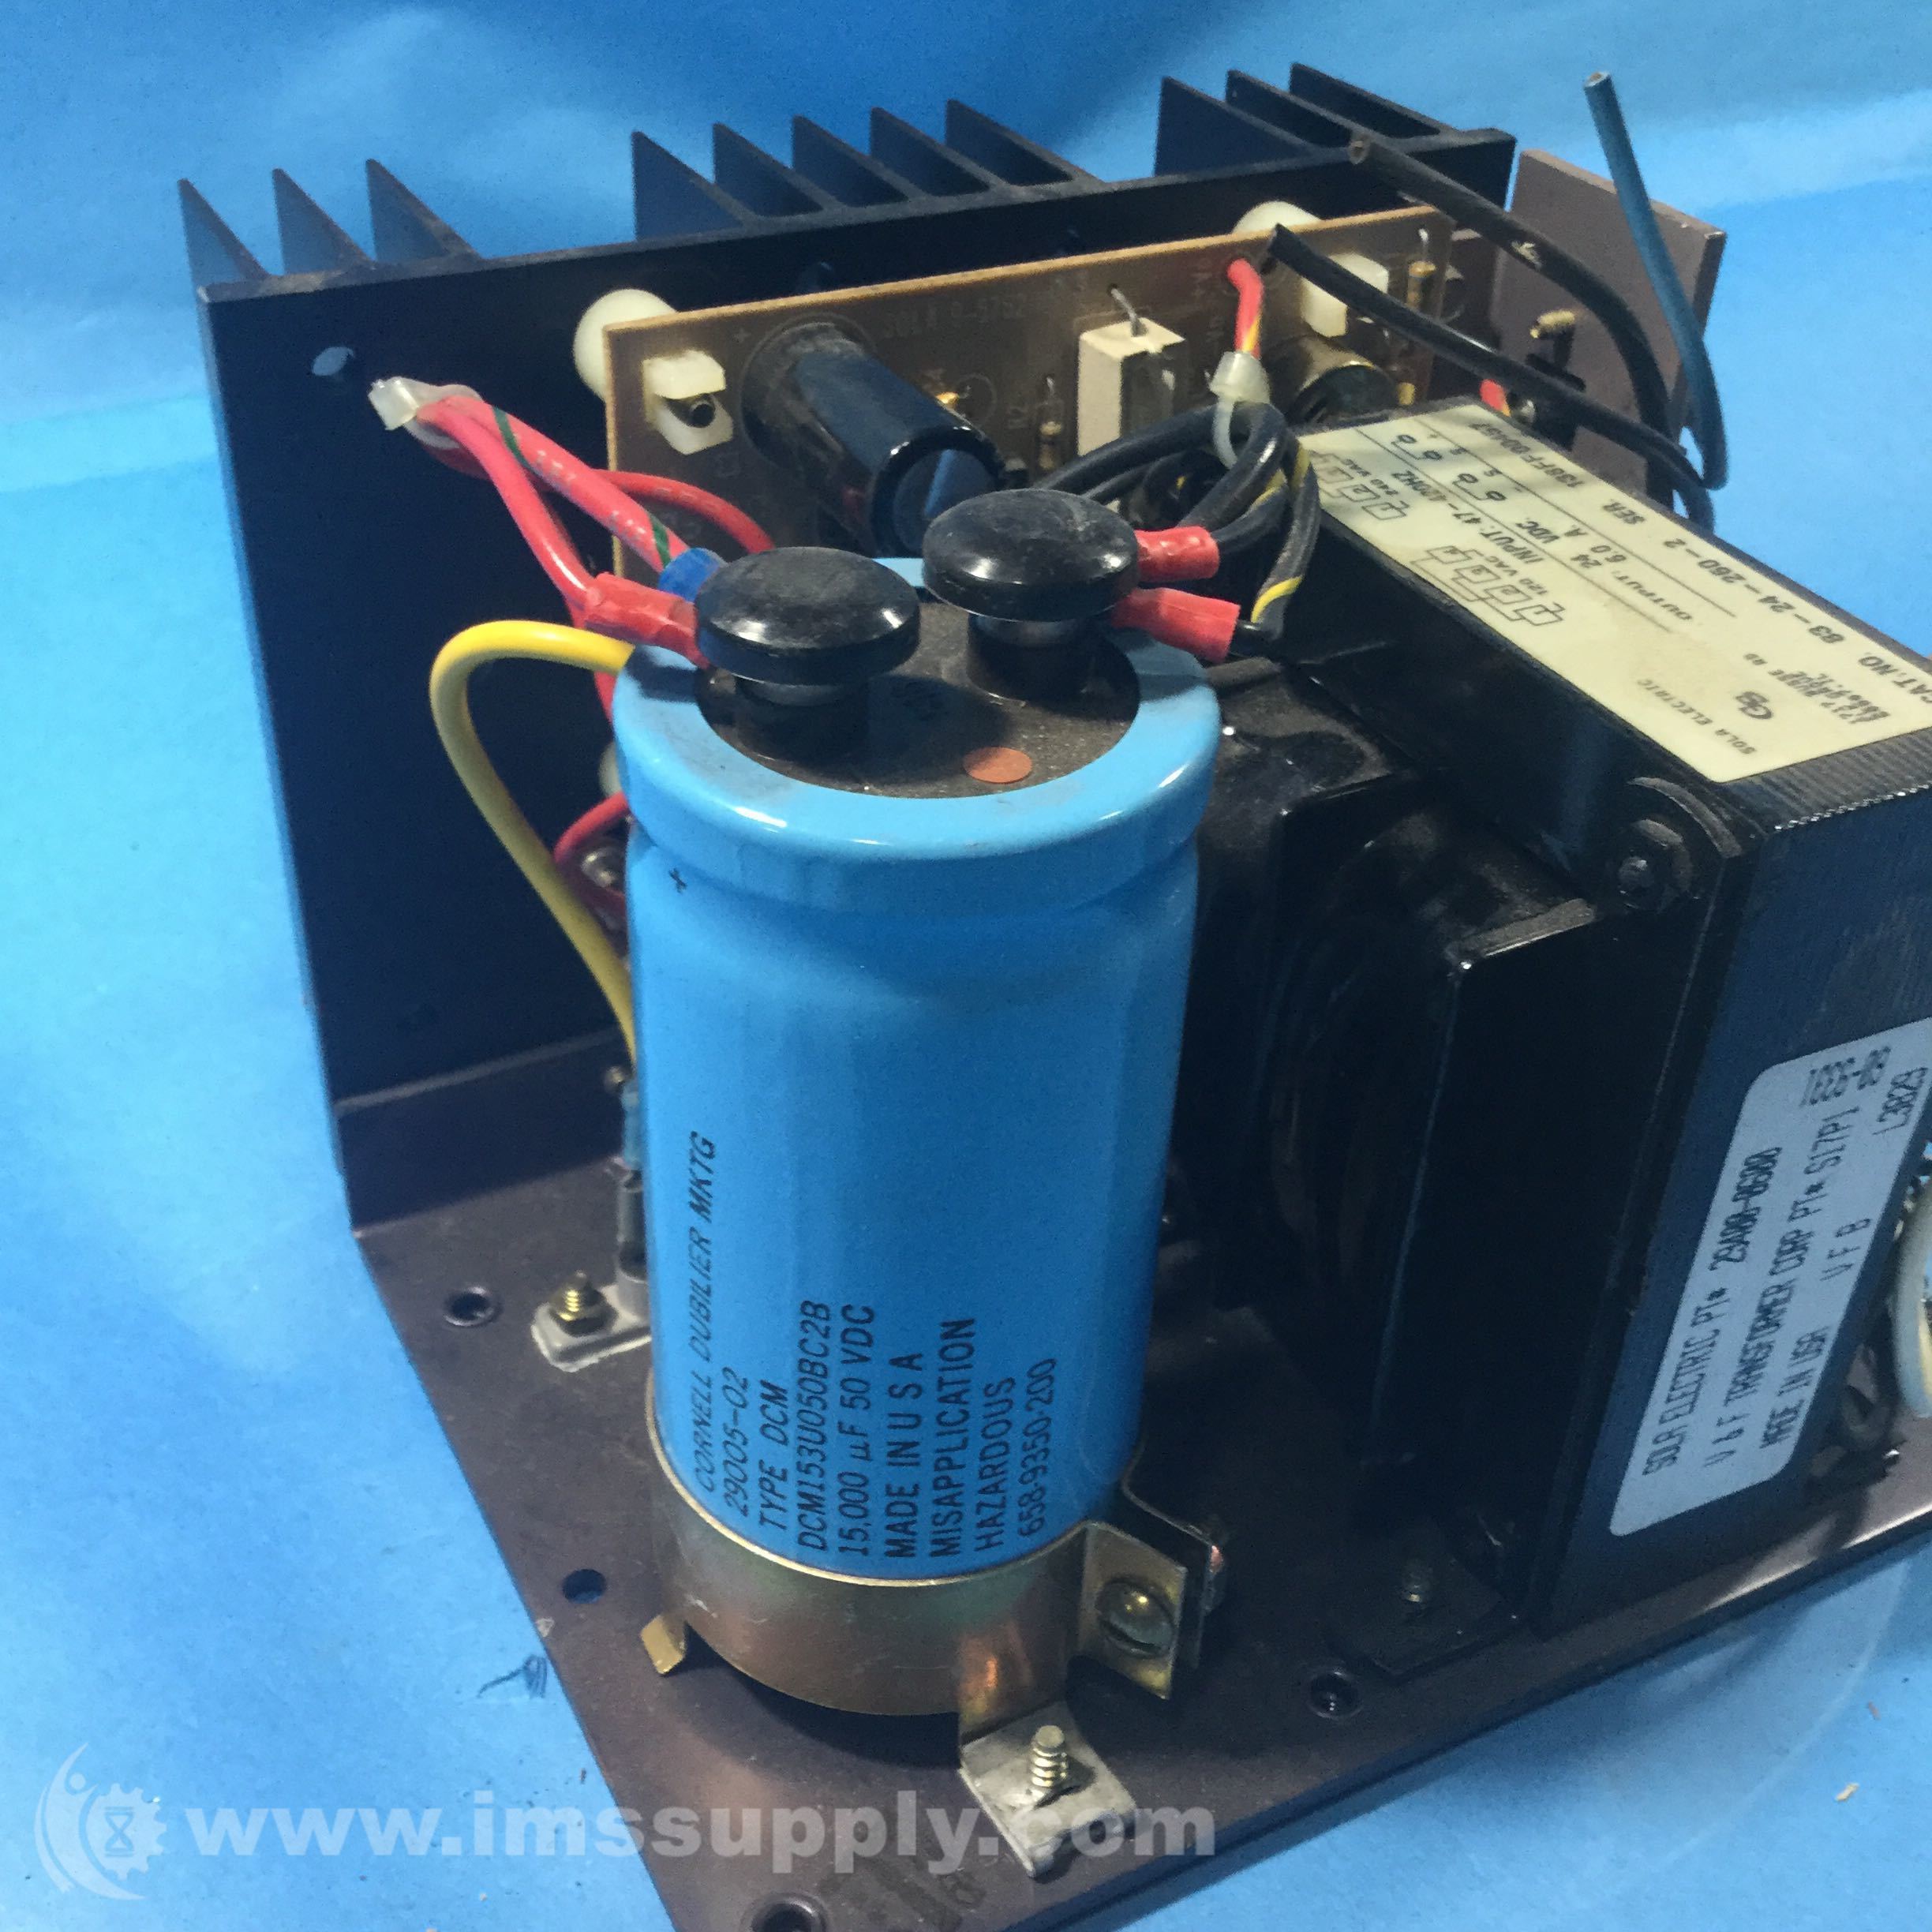 GS SOLA 24VDC 6A DC POWER SUPPLY 83-24-260-2 *PZF* 